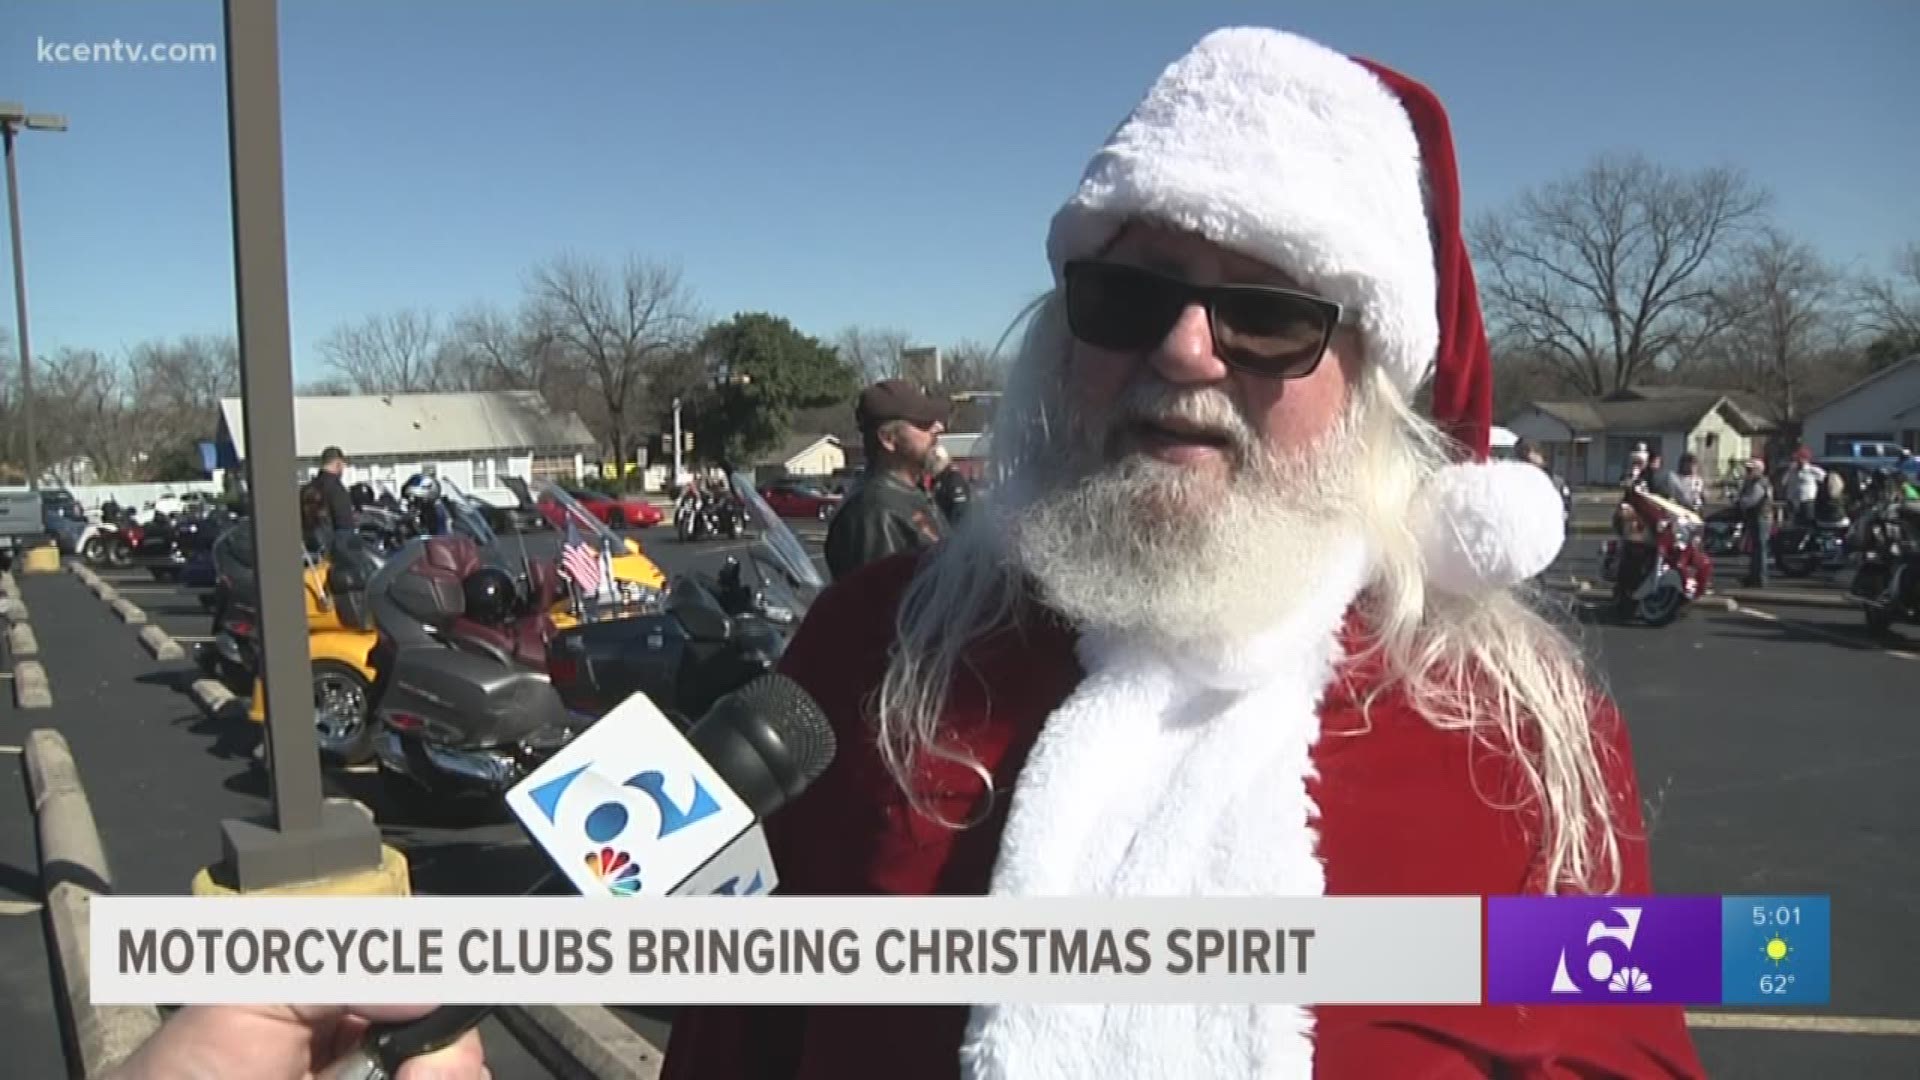 Over 100 Central Texas bikers came together to bring some holiday cheer to kids in the area.